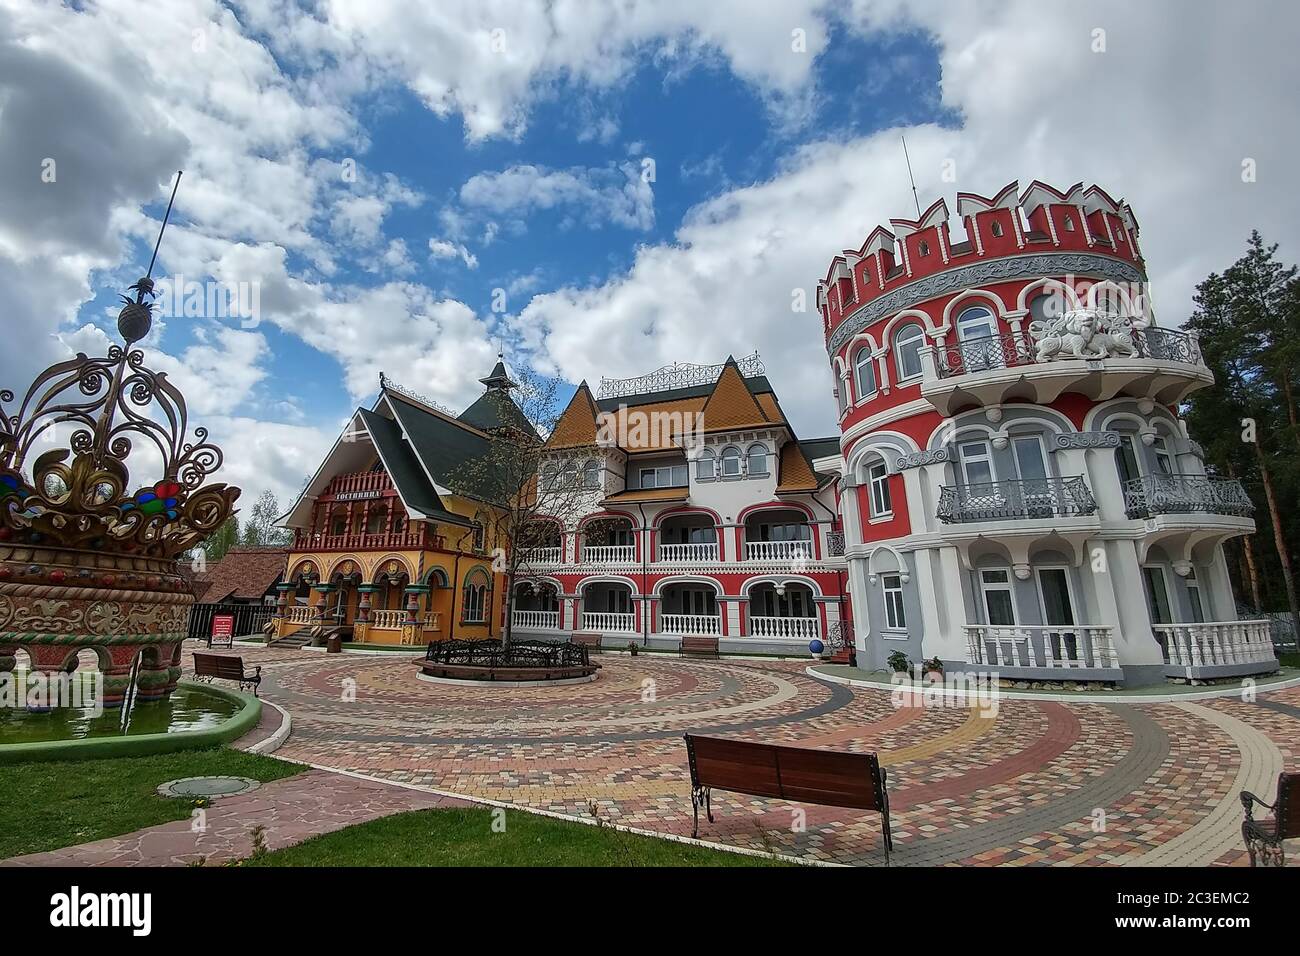 Ryazan, Russia - April 14, 2019: Main building. Ethnic hotel 'Как v staroy skazke' in Russian style. Hotel 'Like an old fairy tale.' Made in the ethnic Russian style and located in the forest. Stock Photo